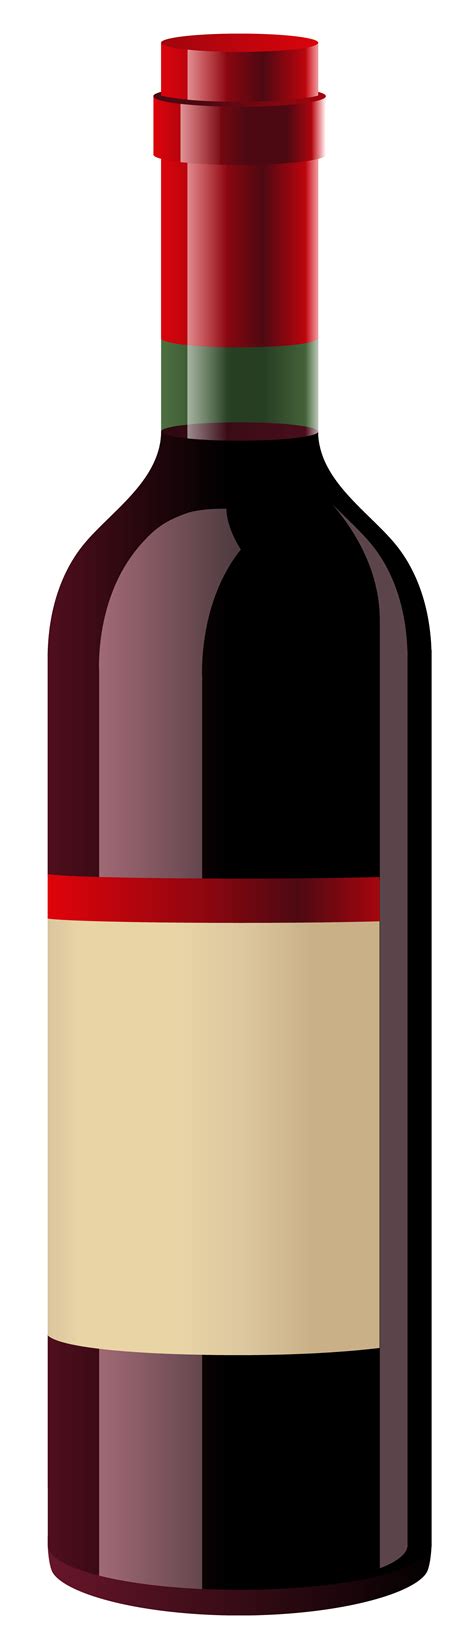 Red Wine Bottle Png Clipart Best Web Clipart